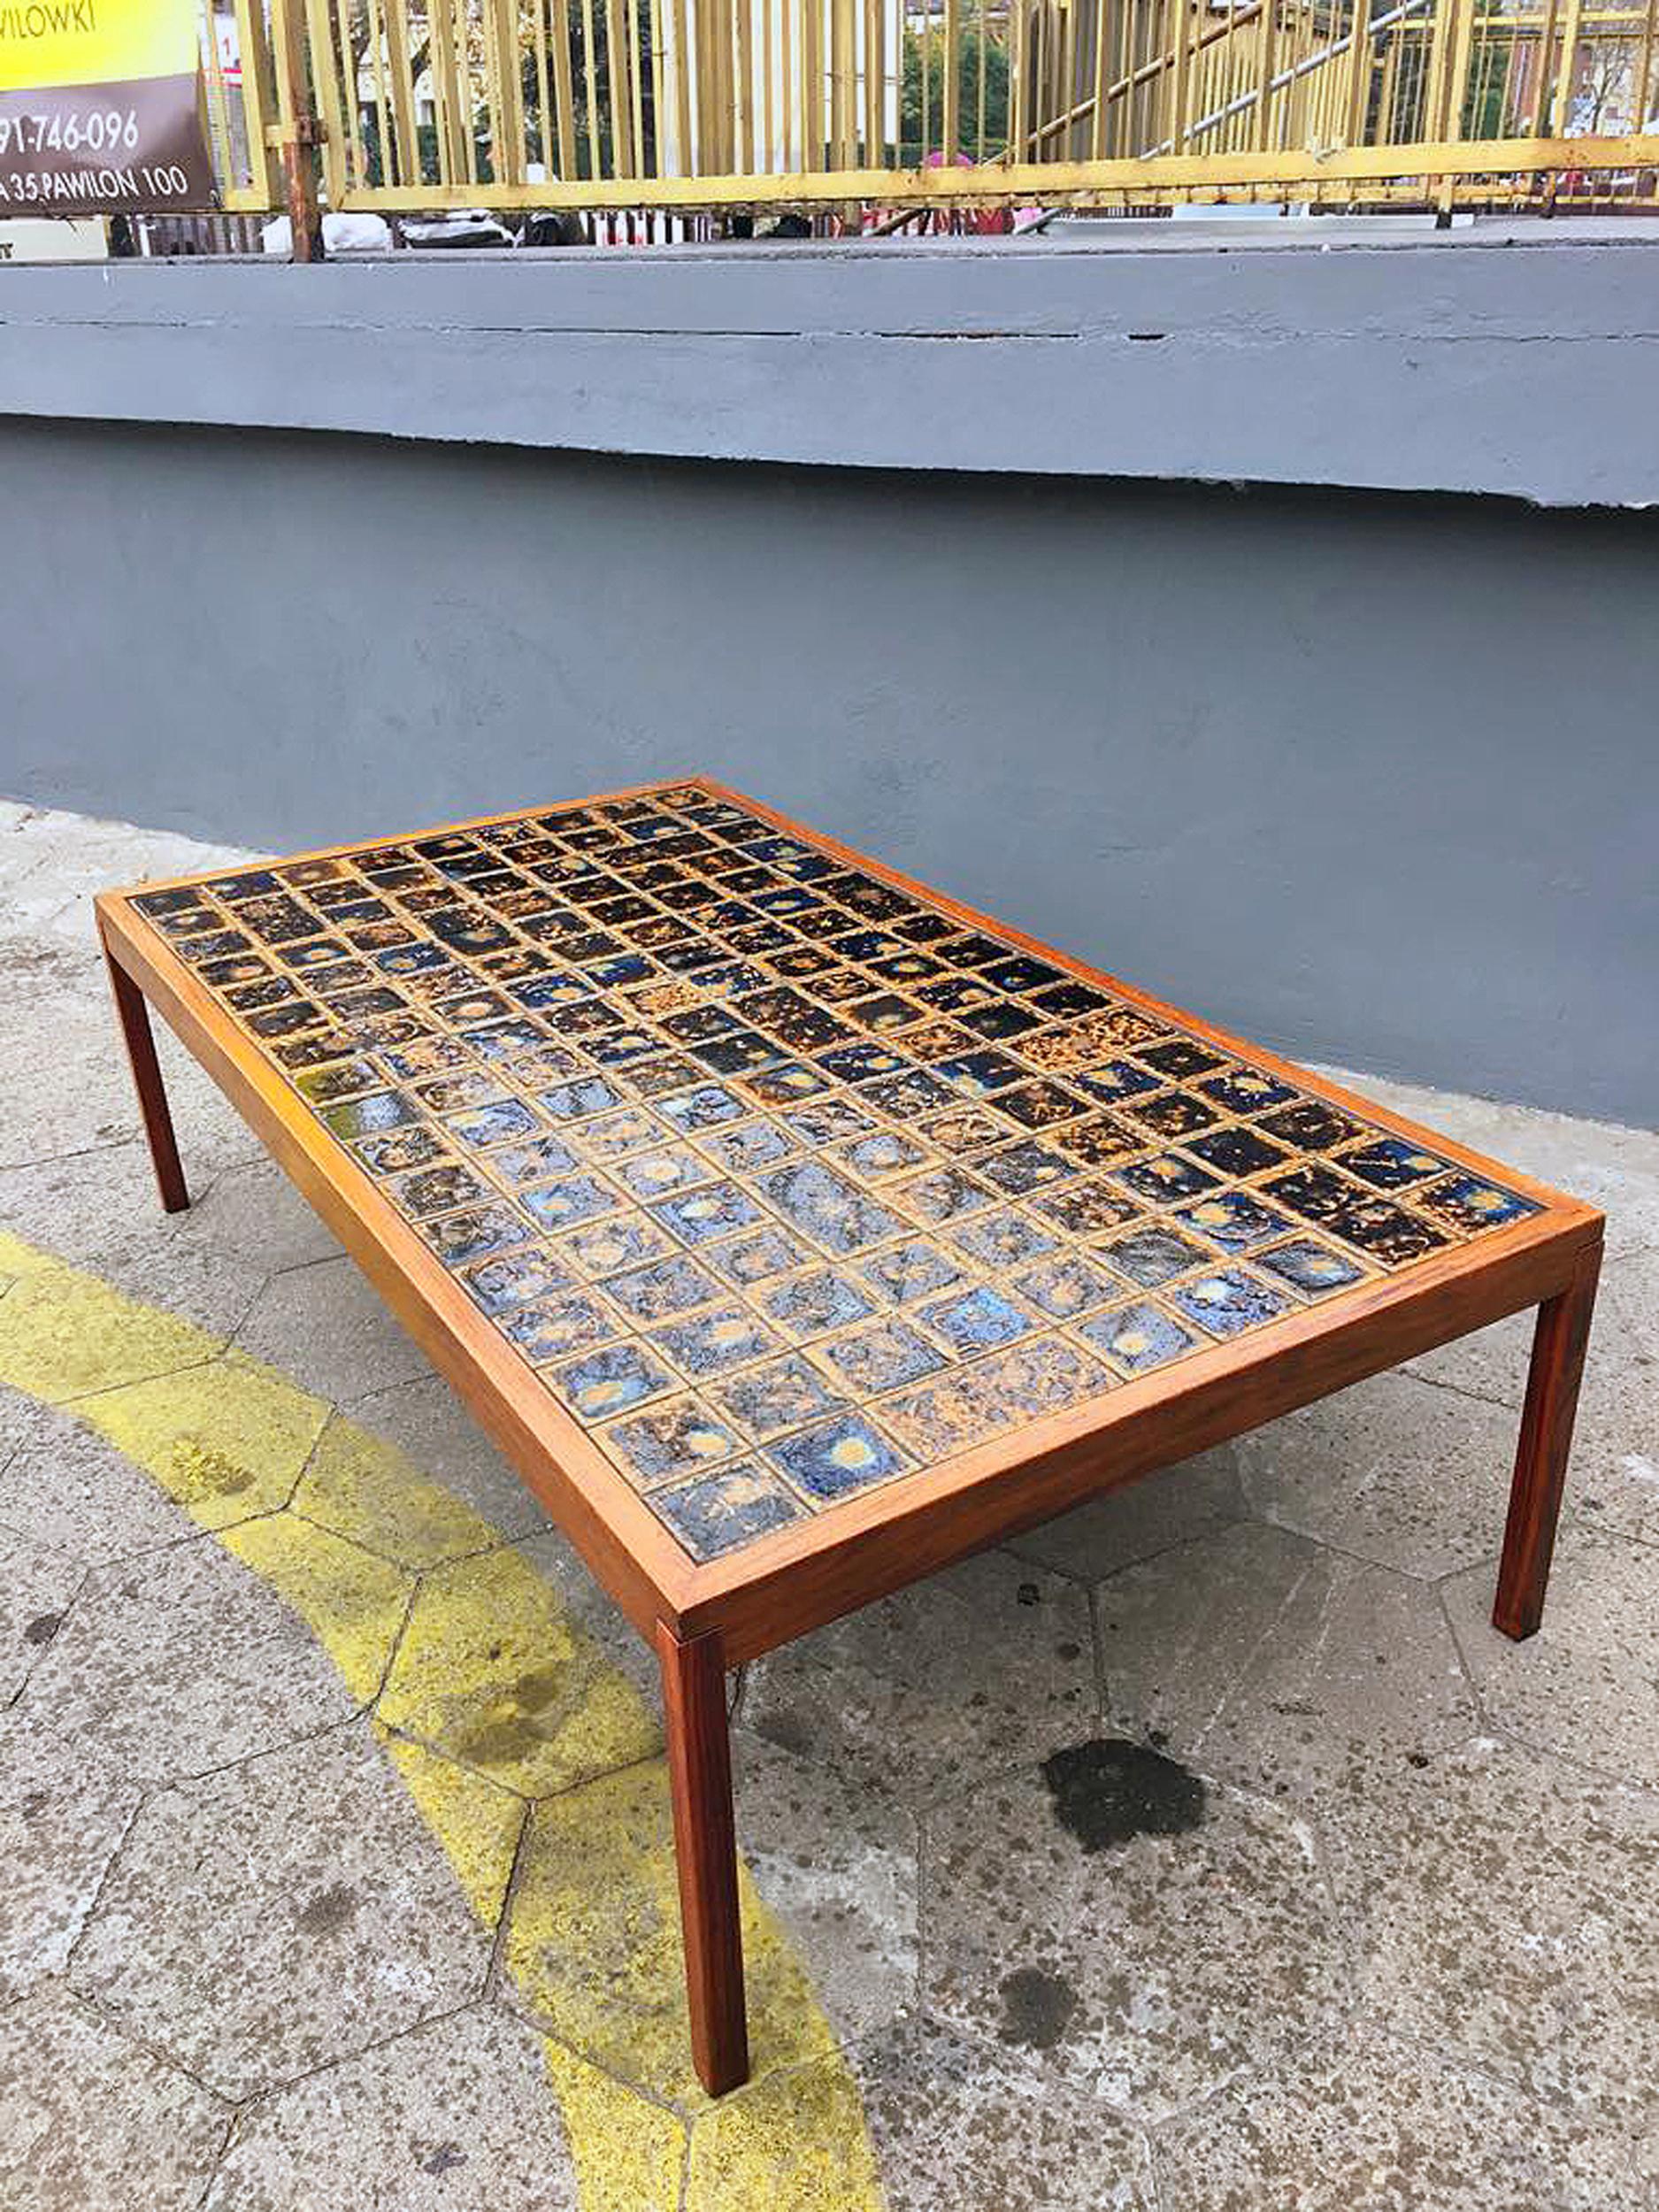 Hand-Crafted Midcentury Large Teak Wood and Ceramik Coffee Table/Bench, 1960s For Sale